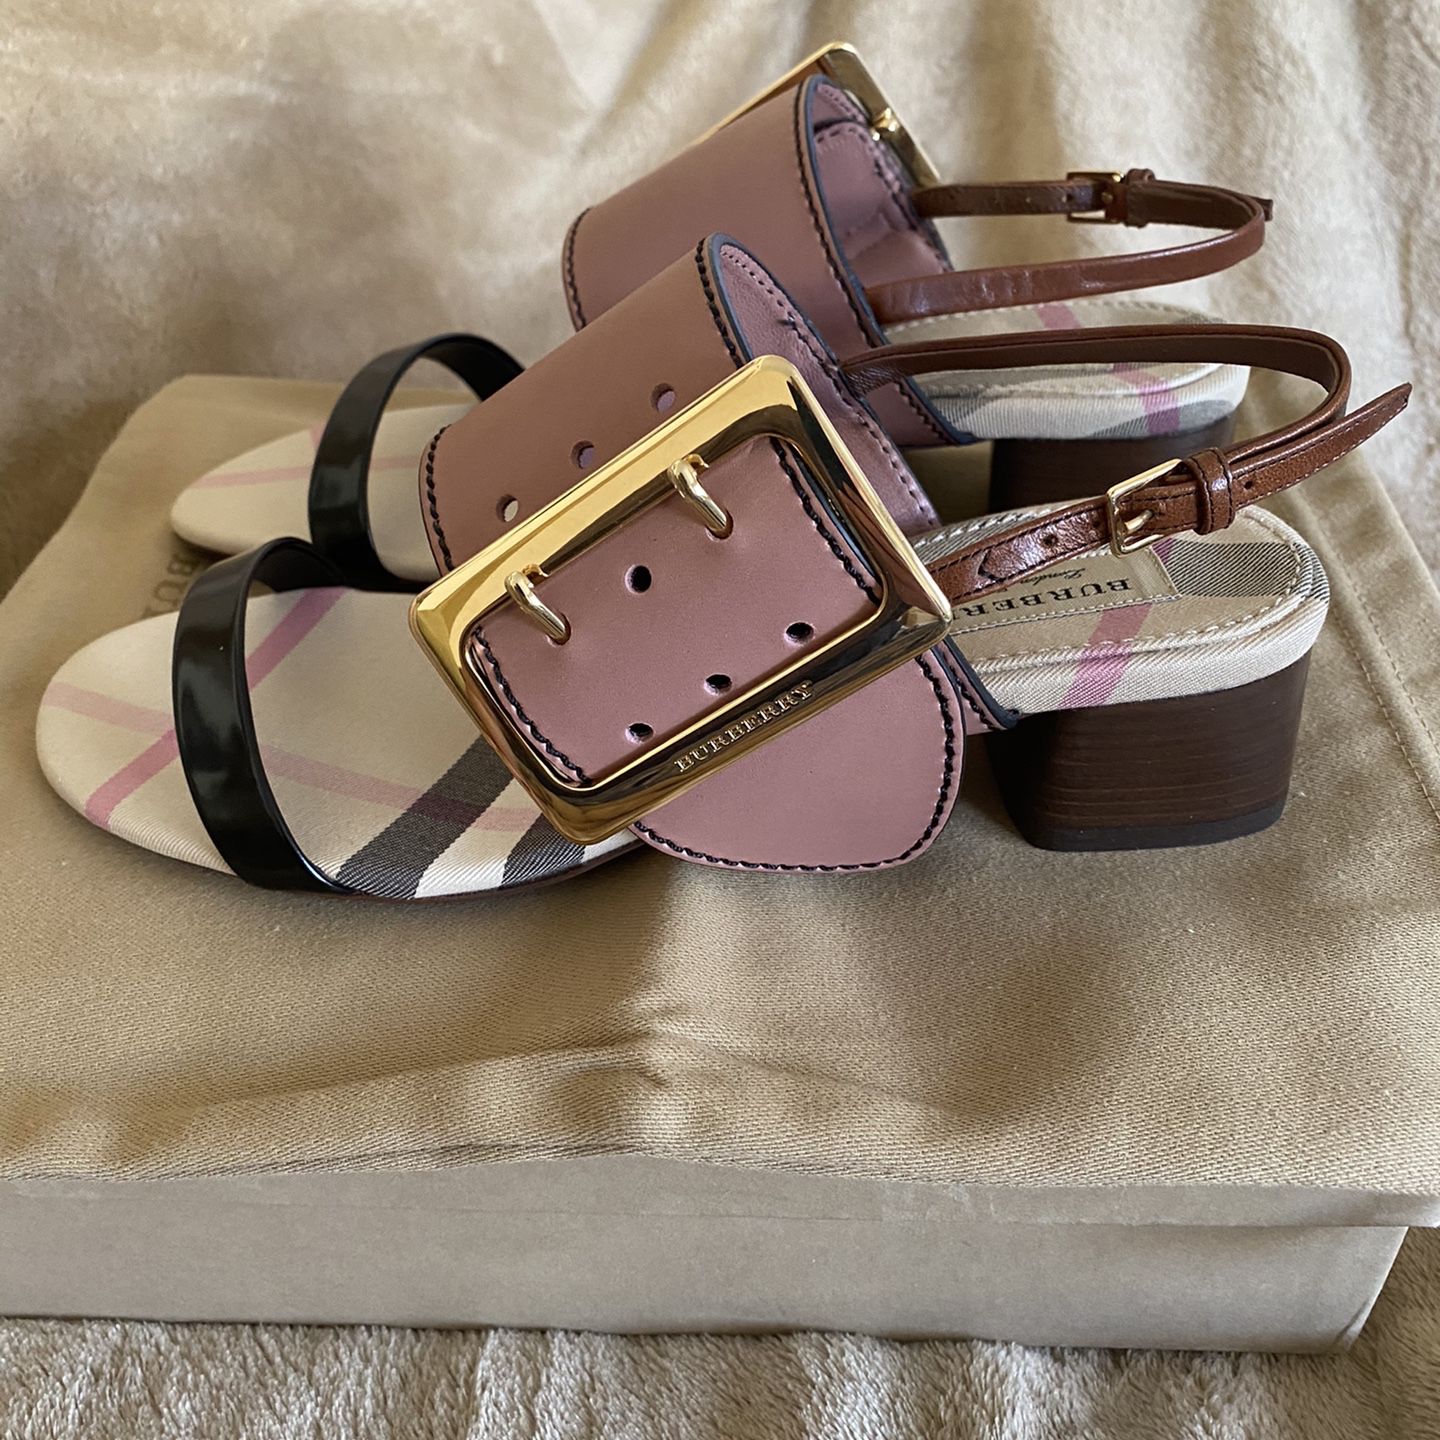 Burberry women trench Buckle Sawley Hc 35 Sandal size Europe 37 us size 7